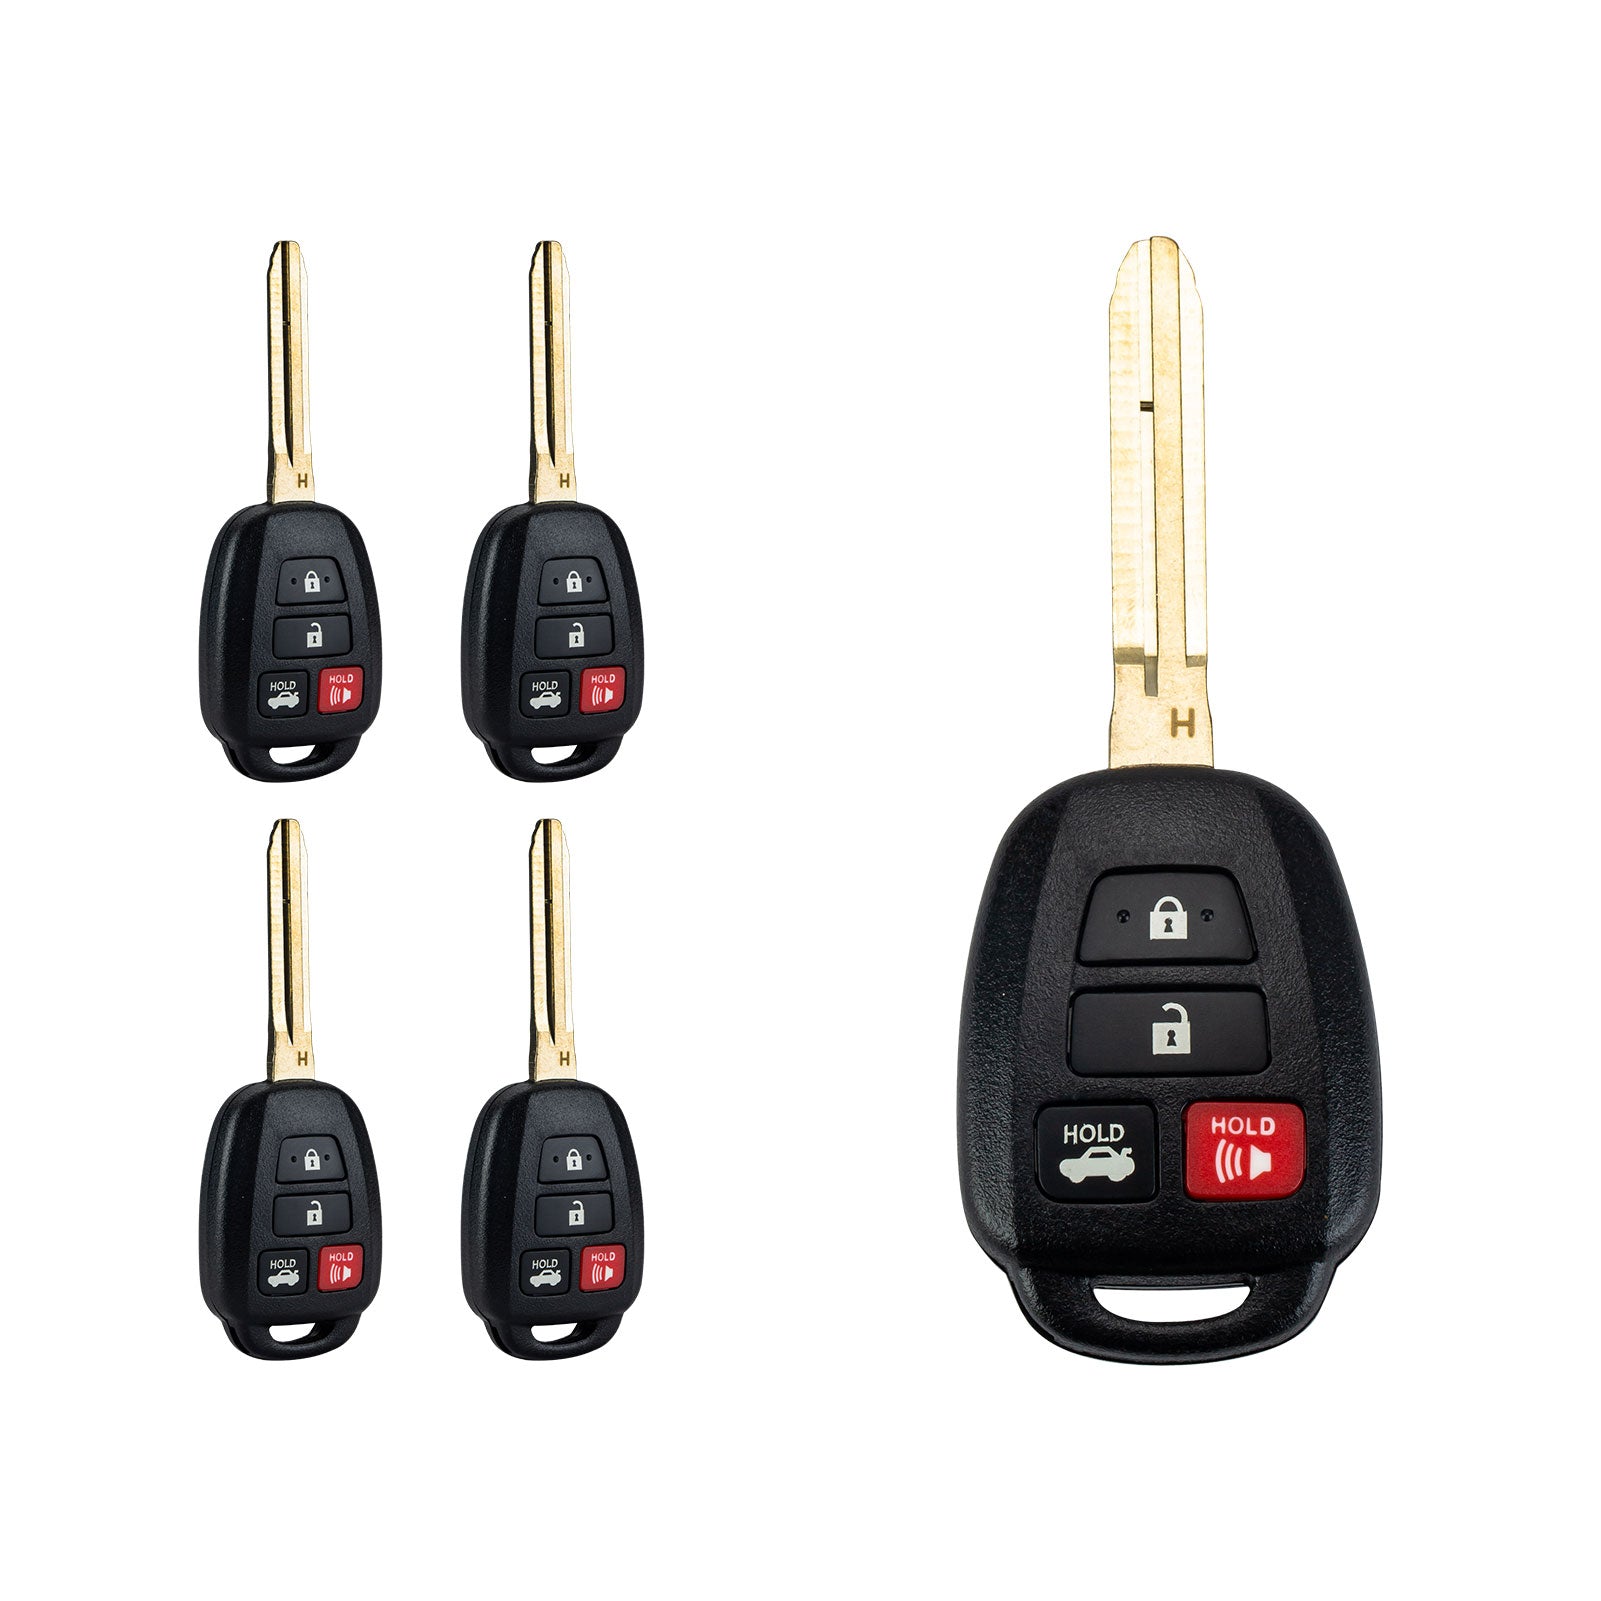 Car Key Fob H Chip Replacement for 2014 - 2017 Toyota Corolla Keyless Remote ONLY HYQ12BEL  KR-T4SH